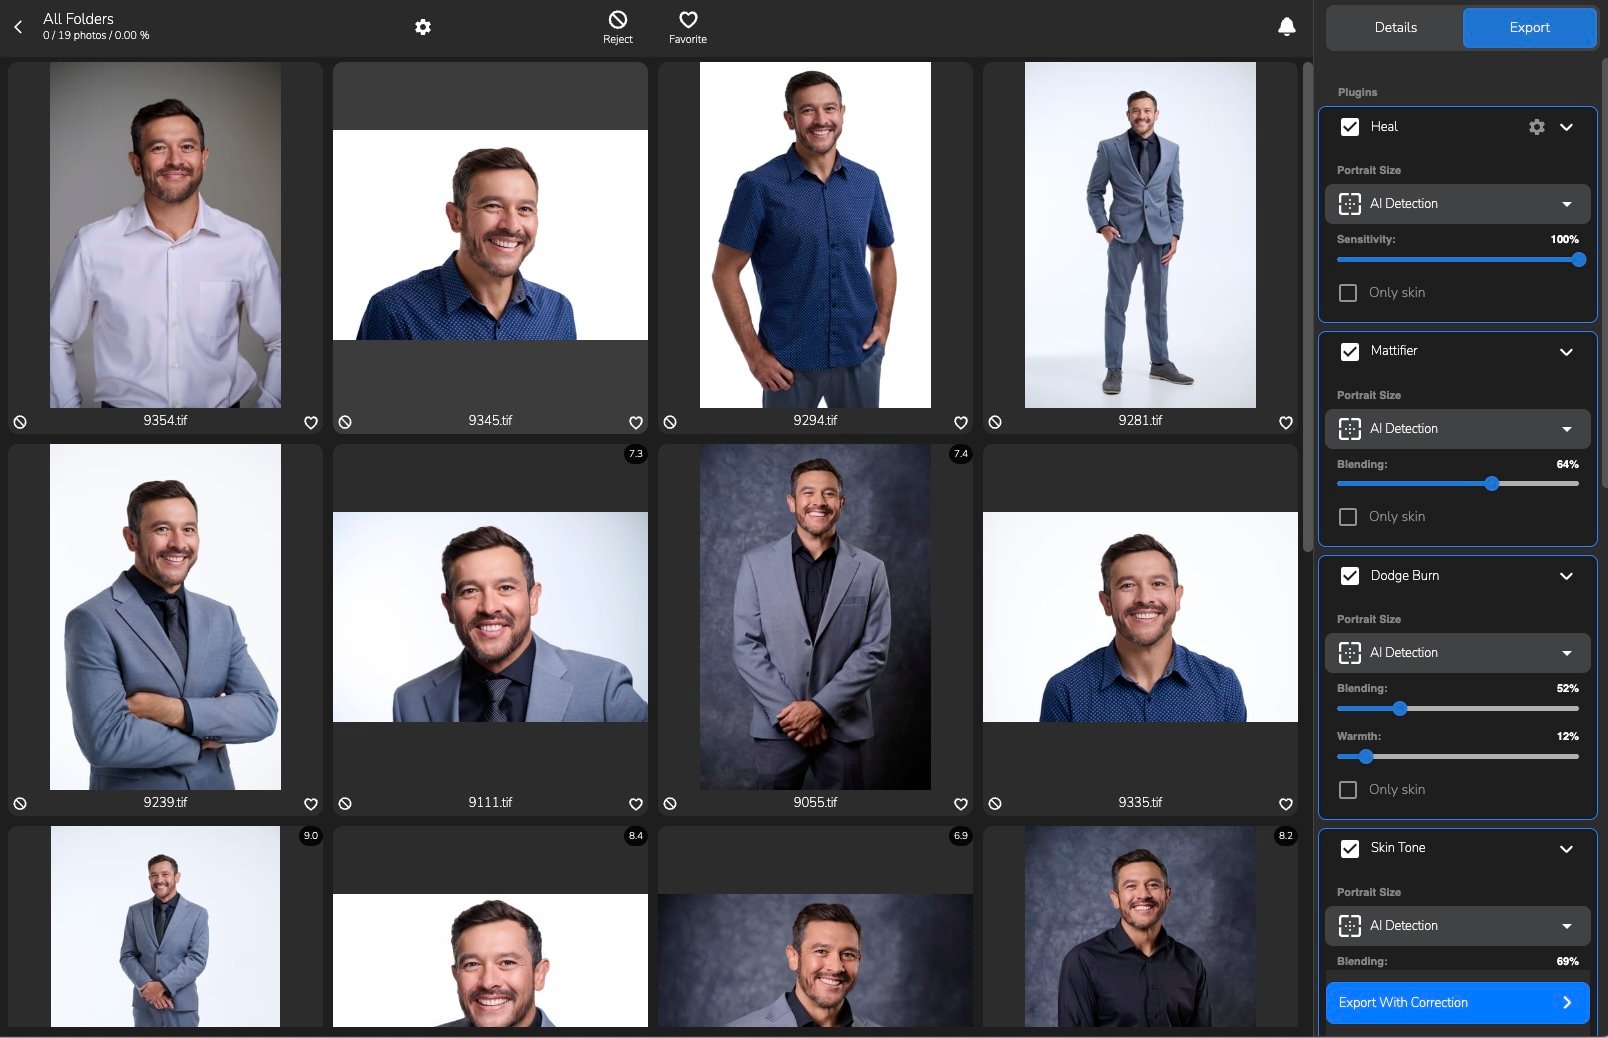 A screenshot of a photo editing software interface showing multiple images of a man in different poses and outfits, mainly wearing suits. The right pane has editing options such as contrast, warmth, and a blue overlay. The upper right corner has an Export button.